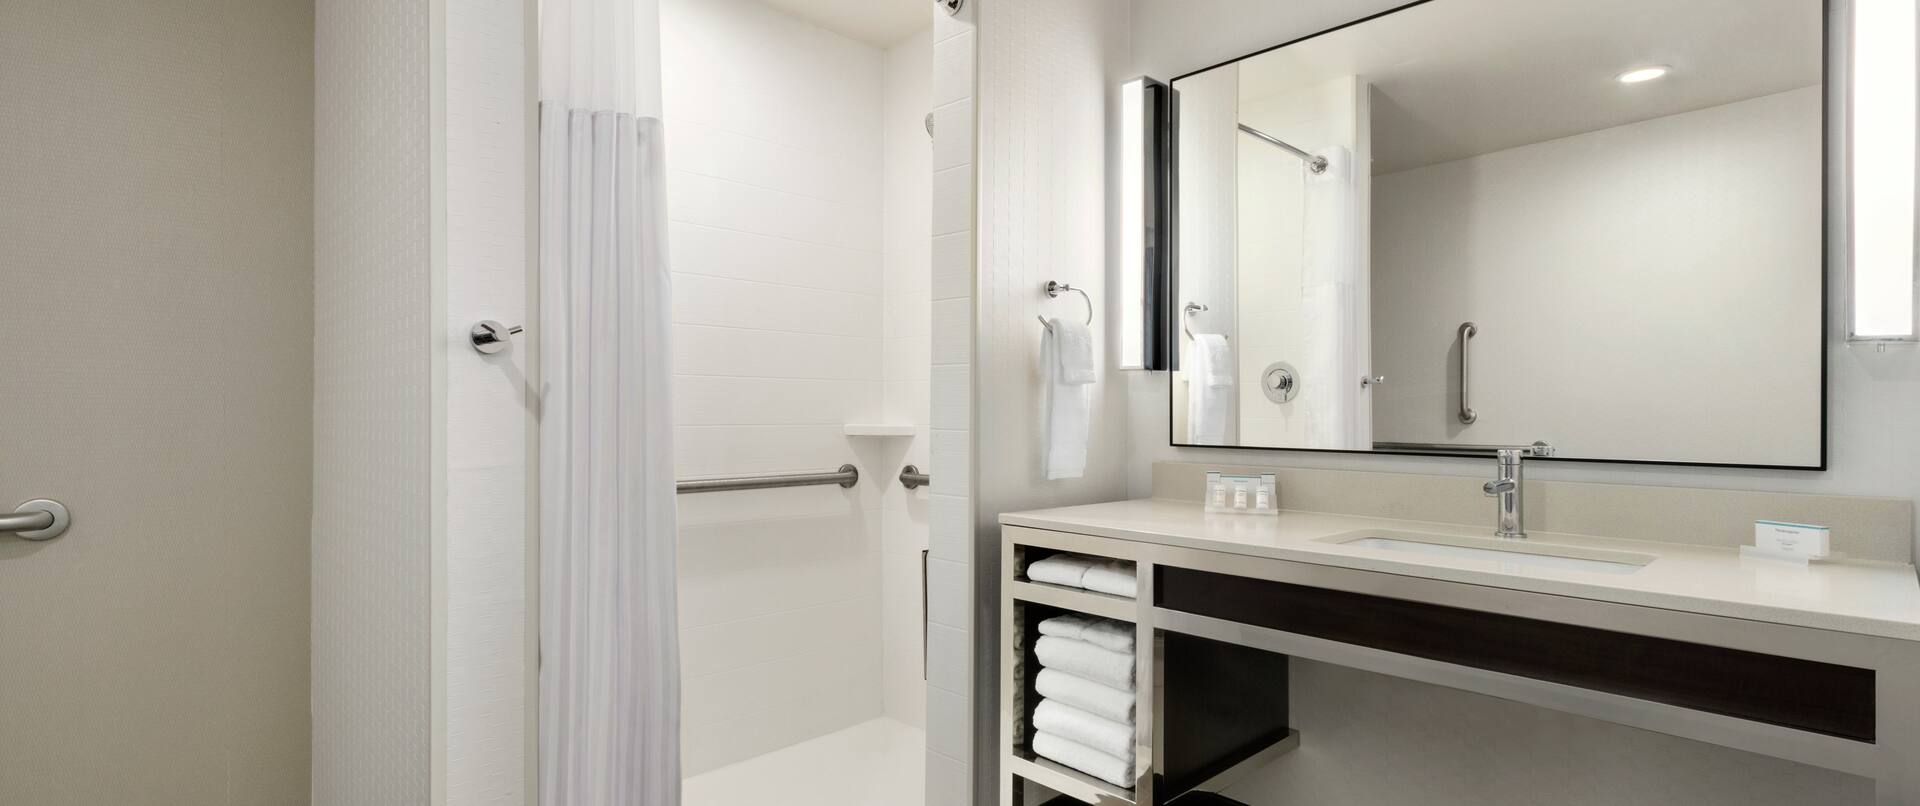 Bathroom with Roll In Shower and Accessible Vanity